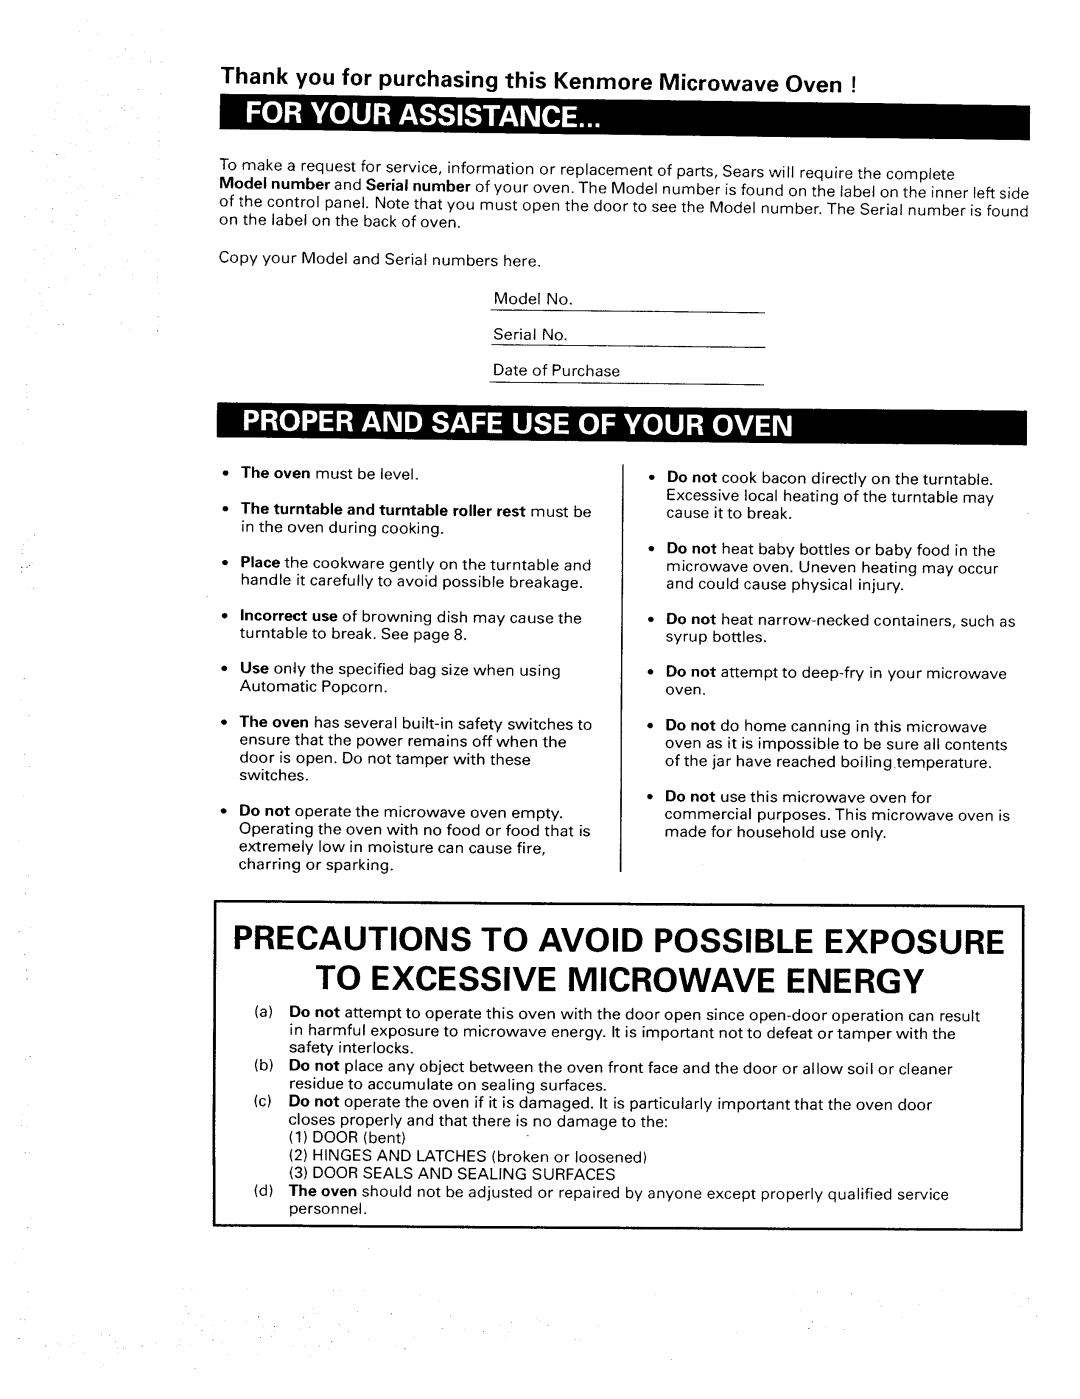 Sears 565. 66480 owner manual To Excessive Microwave Energy, Precautions To Avoid Possible Exposure 